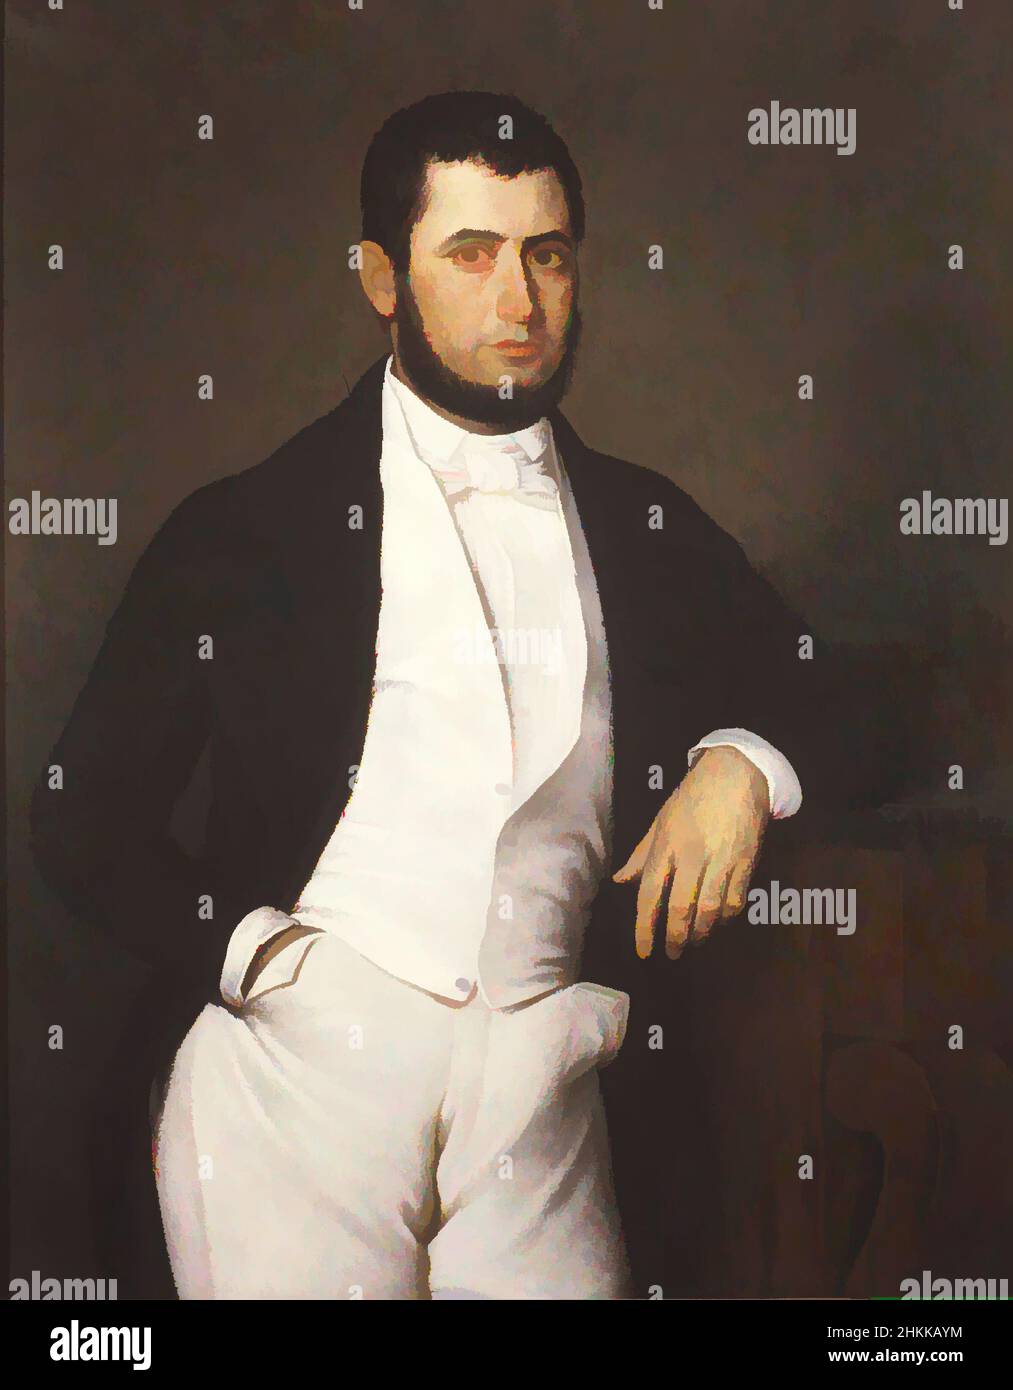 Art inspired by Portrait of an Unknown Man, Jacques Amans, 1801-1888, active in America 1836-1856, Oil on canvas, 1845, 37 1/2 x 29 15/16 in., 95.2 x 76 cm, Amans, Jacques, american, beard, facial hair, handsome, male figure, man, oil on canvas, painting, pedestal, portrait, unknown, Classic works modernized by Artotop with a splash of modernity. Shapes, color and value, eye-catching visual impact on art. Emotions through freedom of artworks in a contemporary way. A timeless message pursuing a wildly creative new direction. Artists turning to the digital medium and creating the Artotop NFT Stock Photo